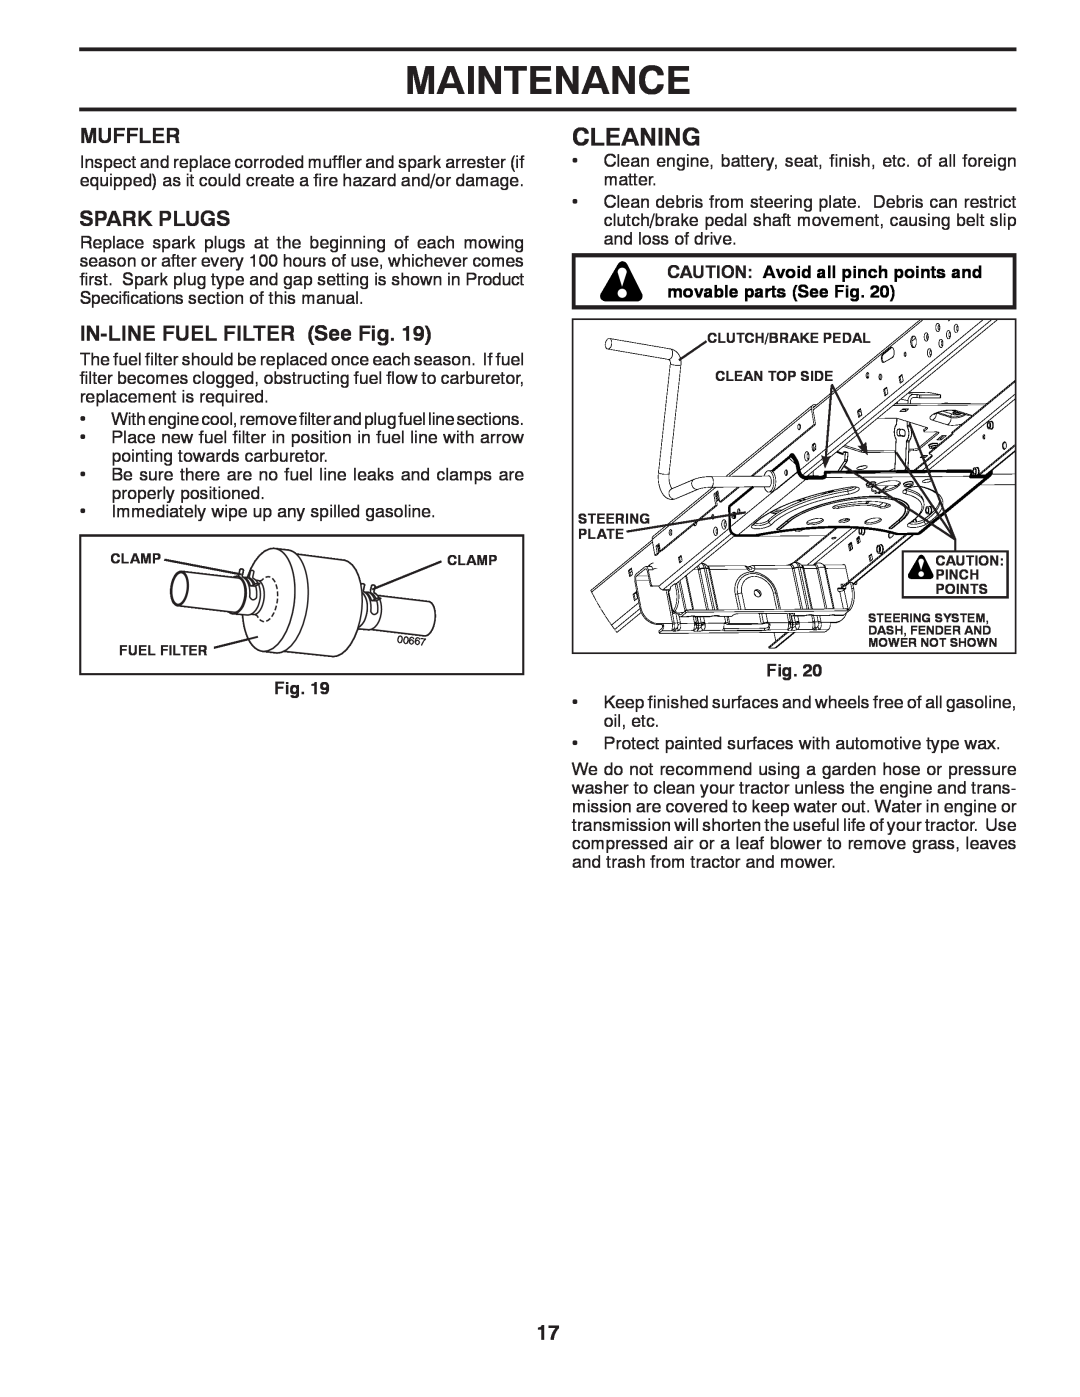 Ariens 935335 42 manual Cleaning, Maintenance, Muffler, Spark Plugs, IN-LINEFUEL FILTER See Fig 